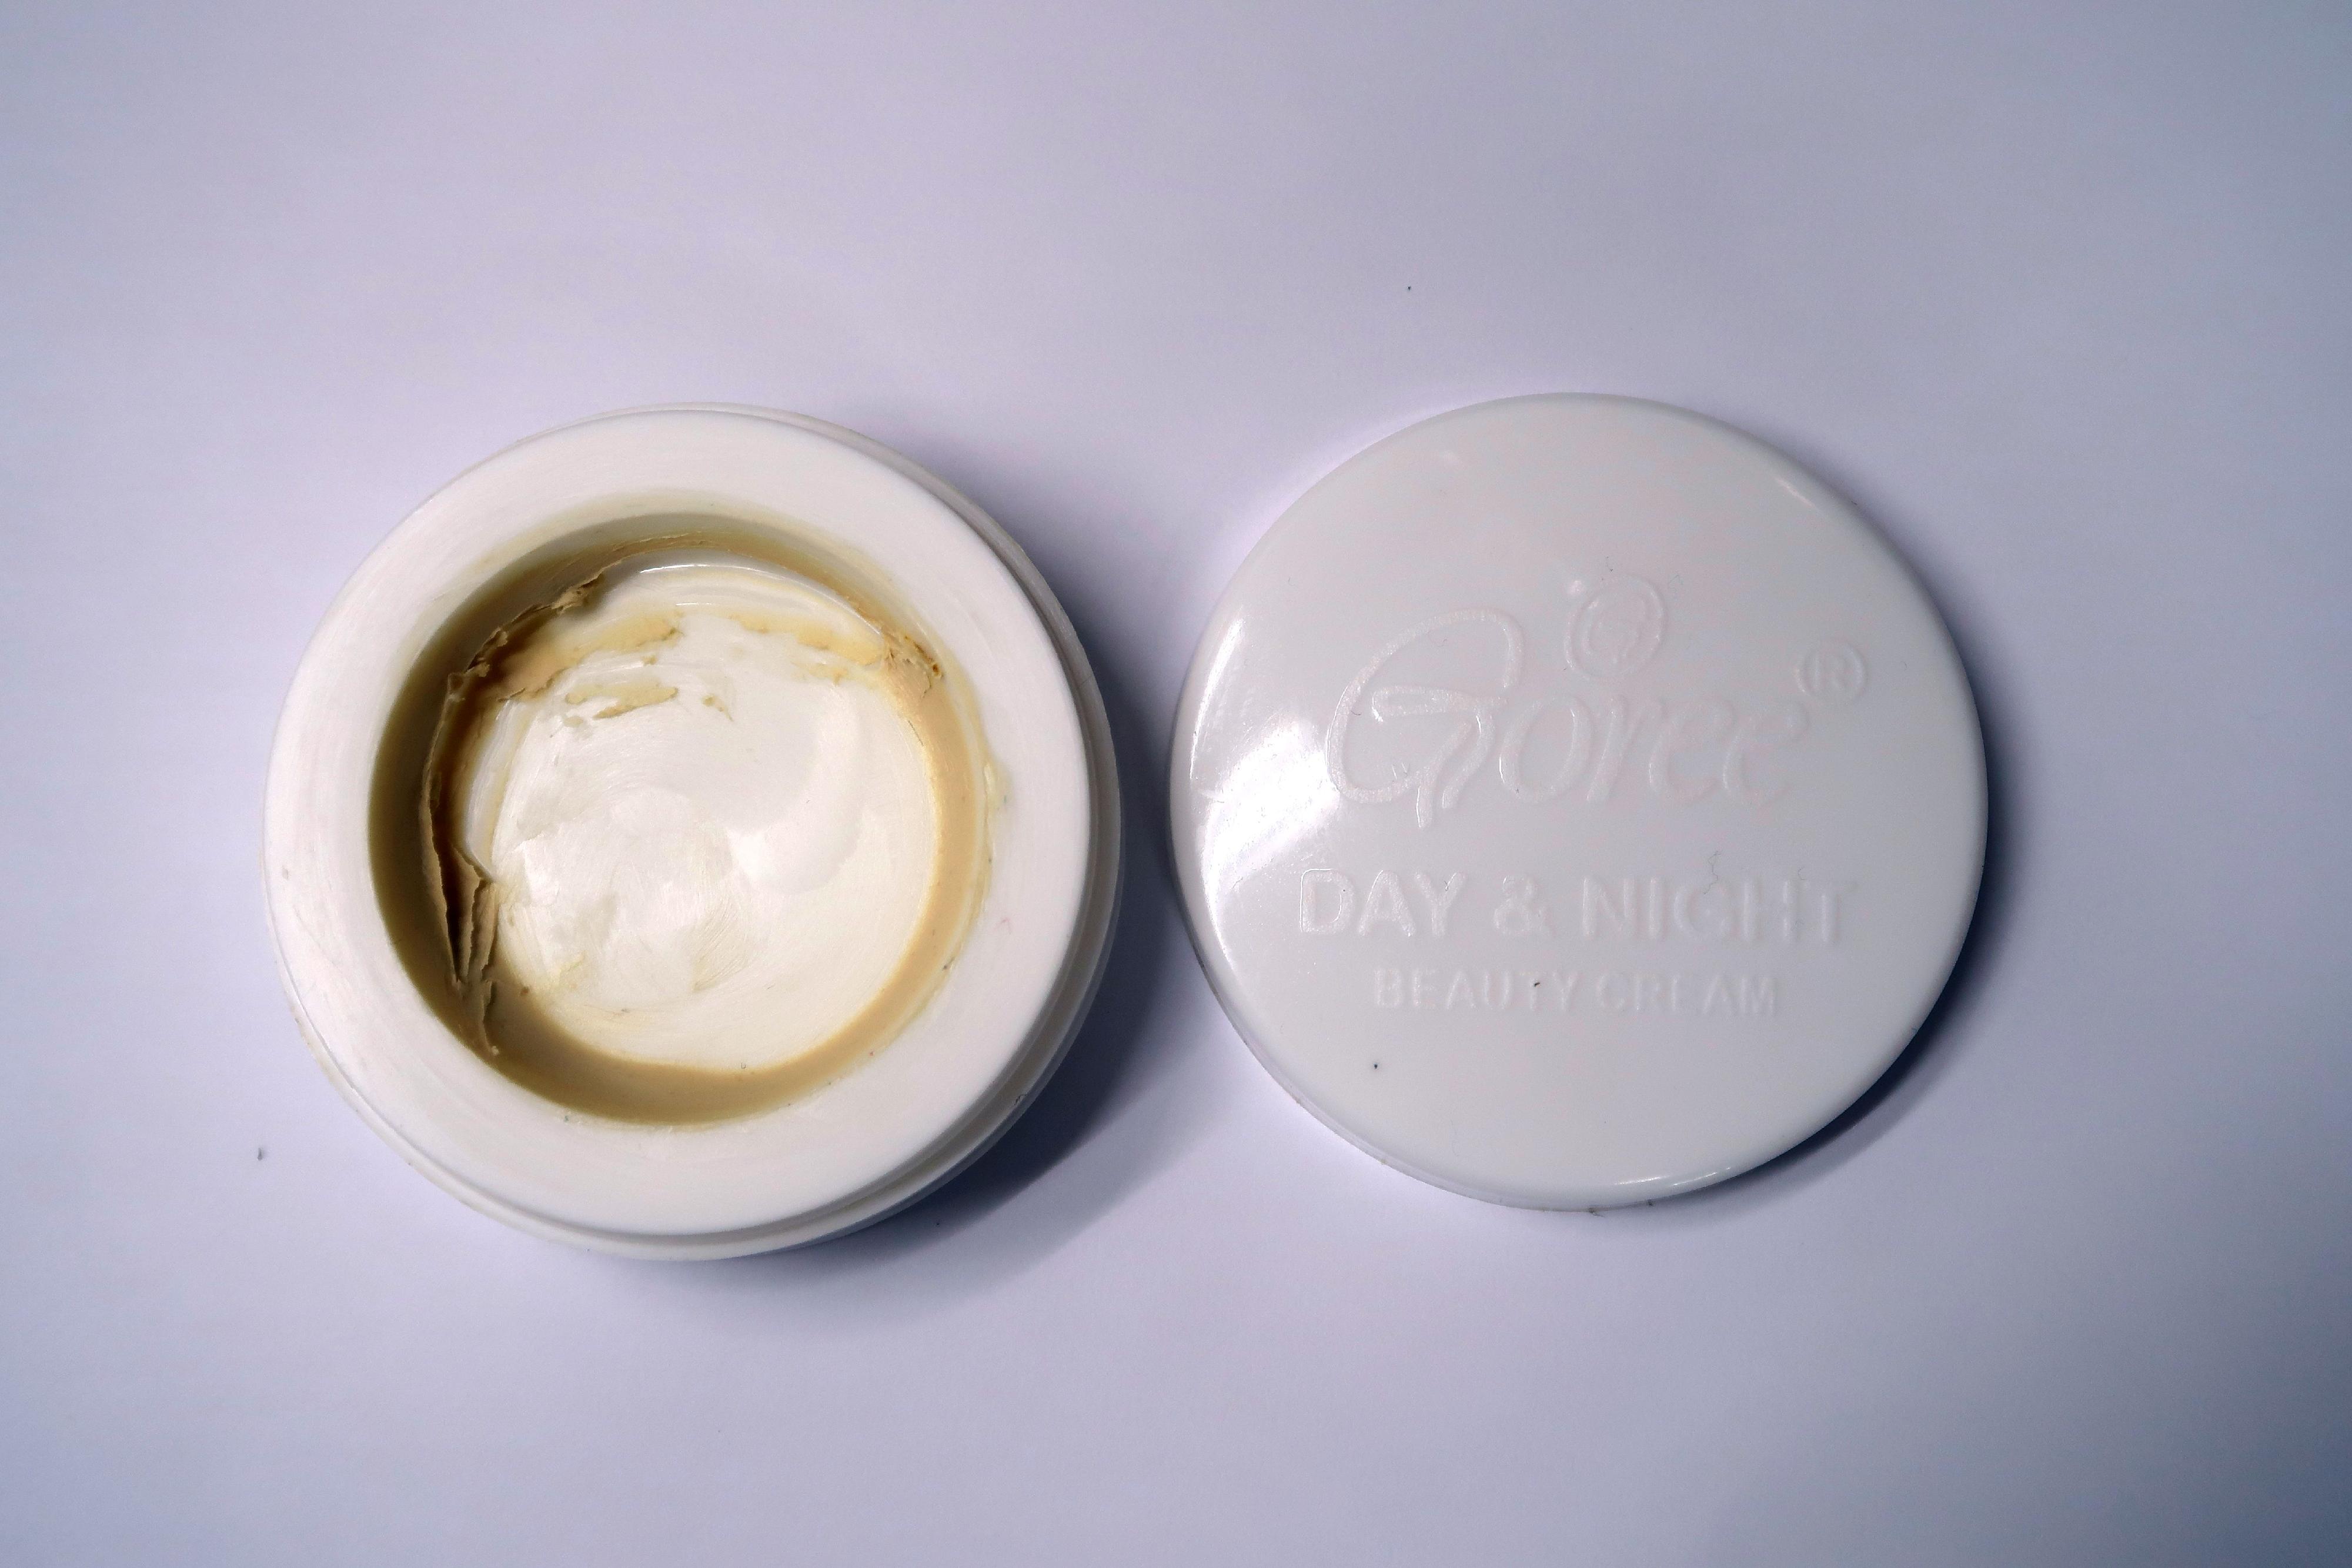 The Centre for Health Protection of the Department of Health today (February 10) appealed to members of the public again not to use a whitening cream product as it may contain excessive mercury, which is harmful to health. Photo shows the product concerned.
